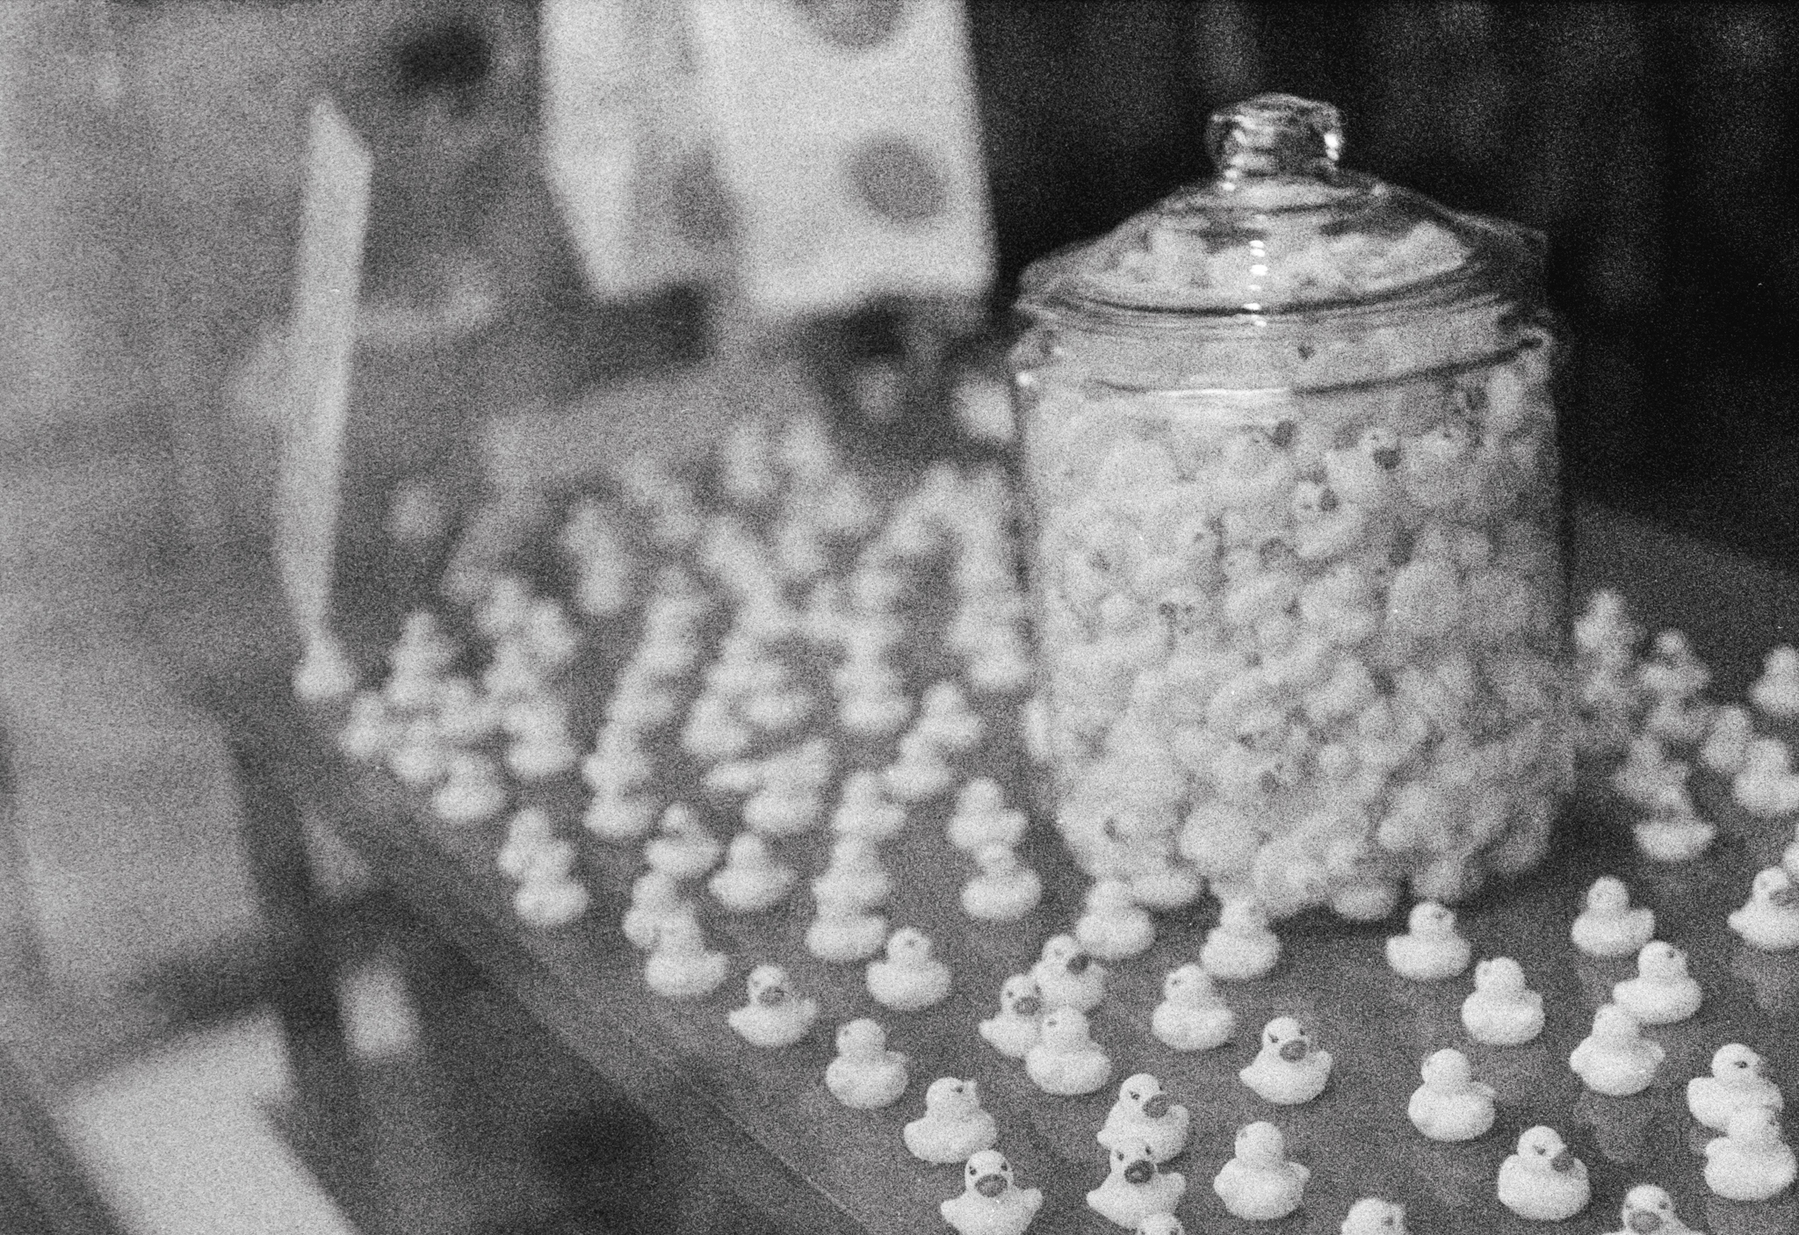 a scan of a black and white photo showing a bunch of rubber ducks on a table inside a glass jar sitting on a window